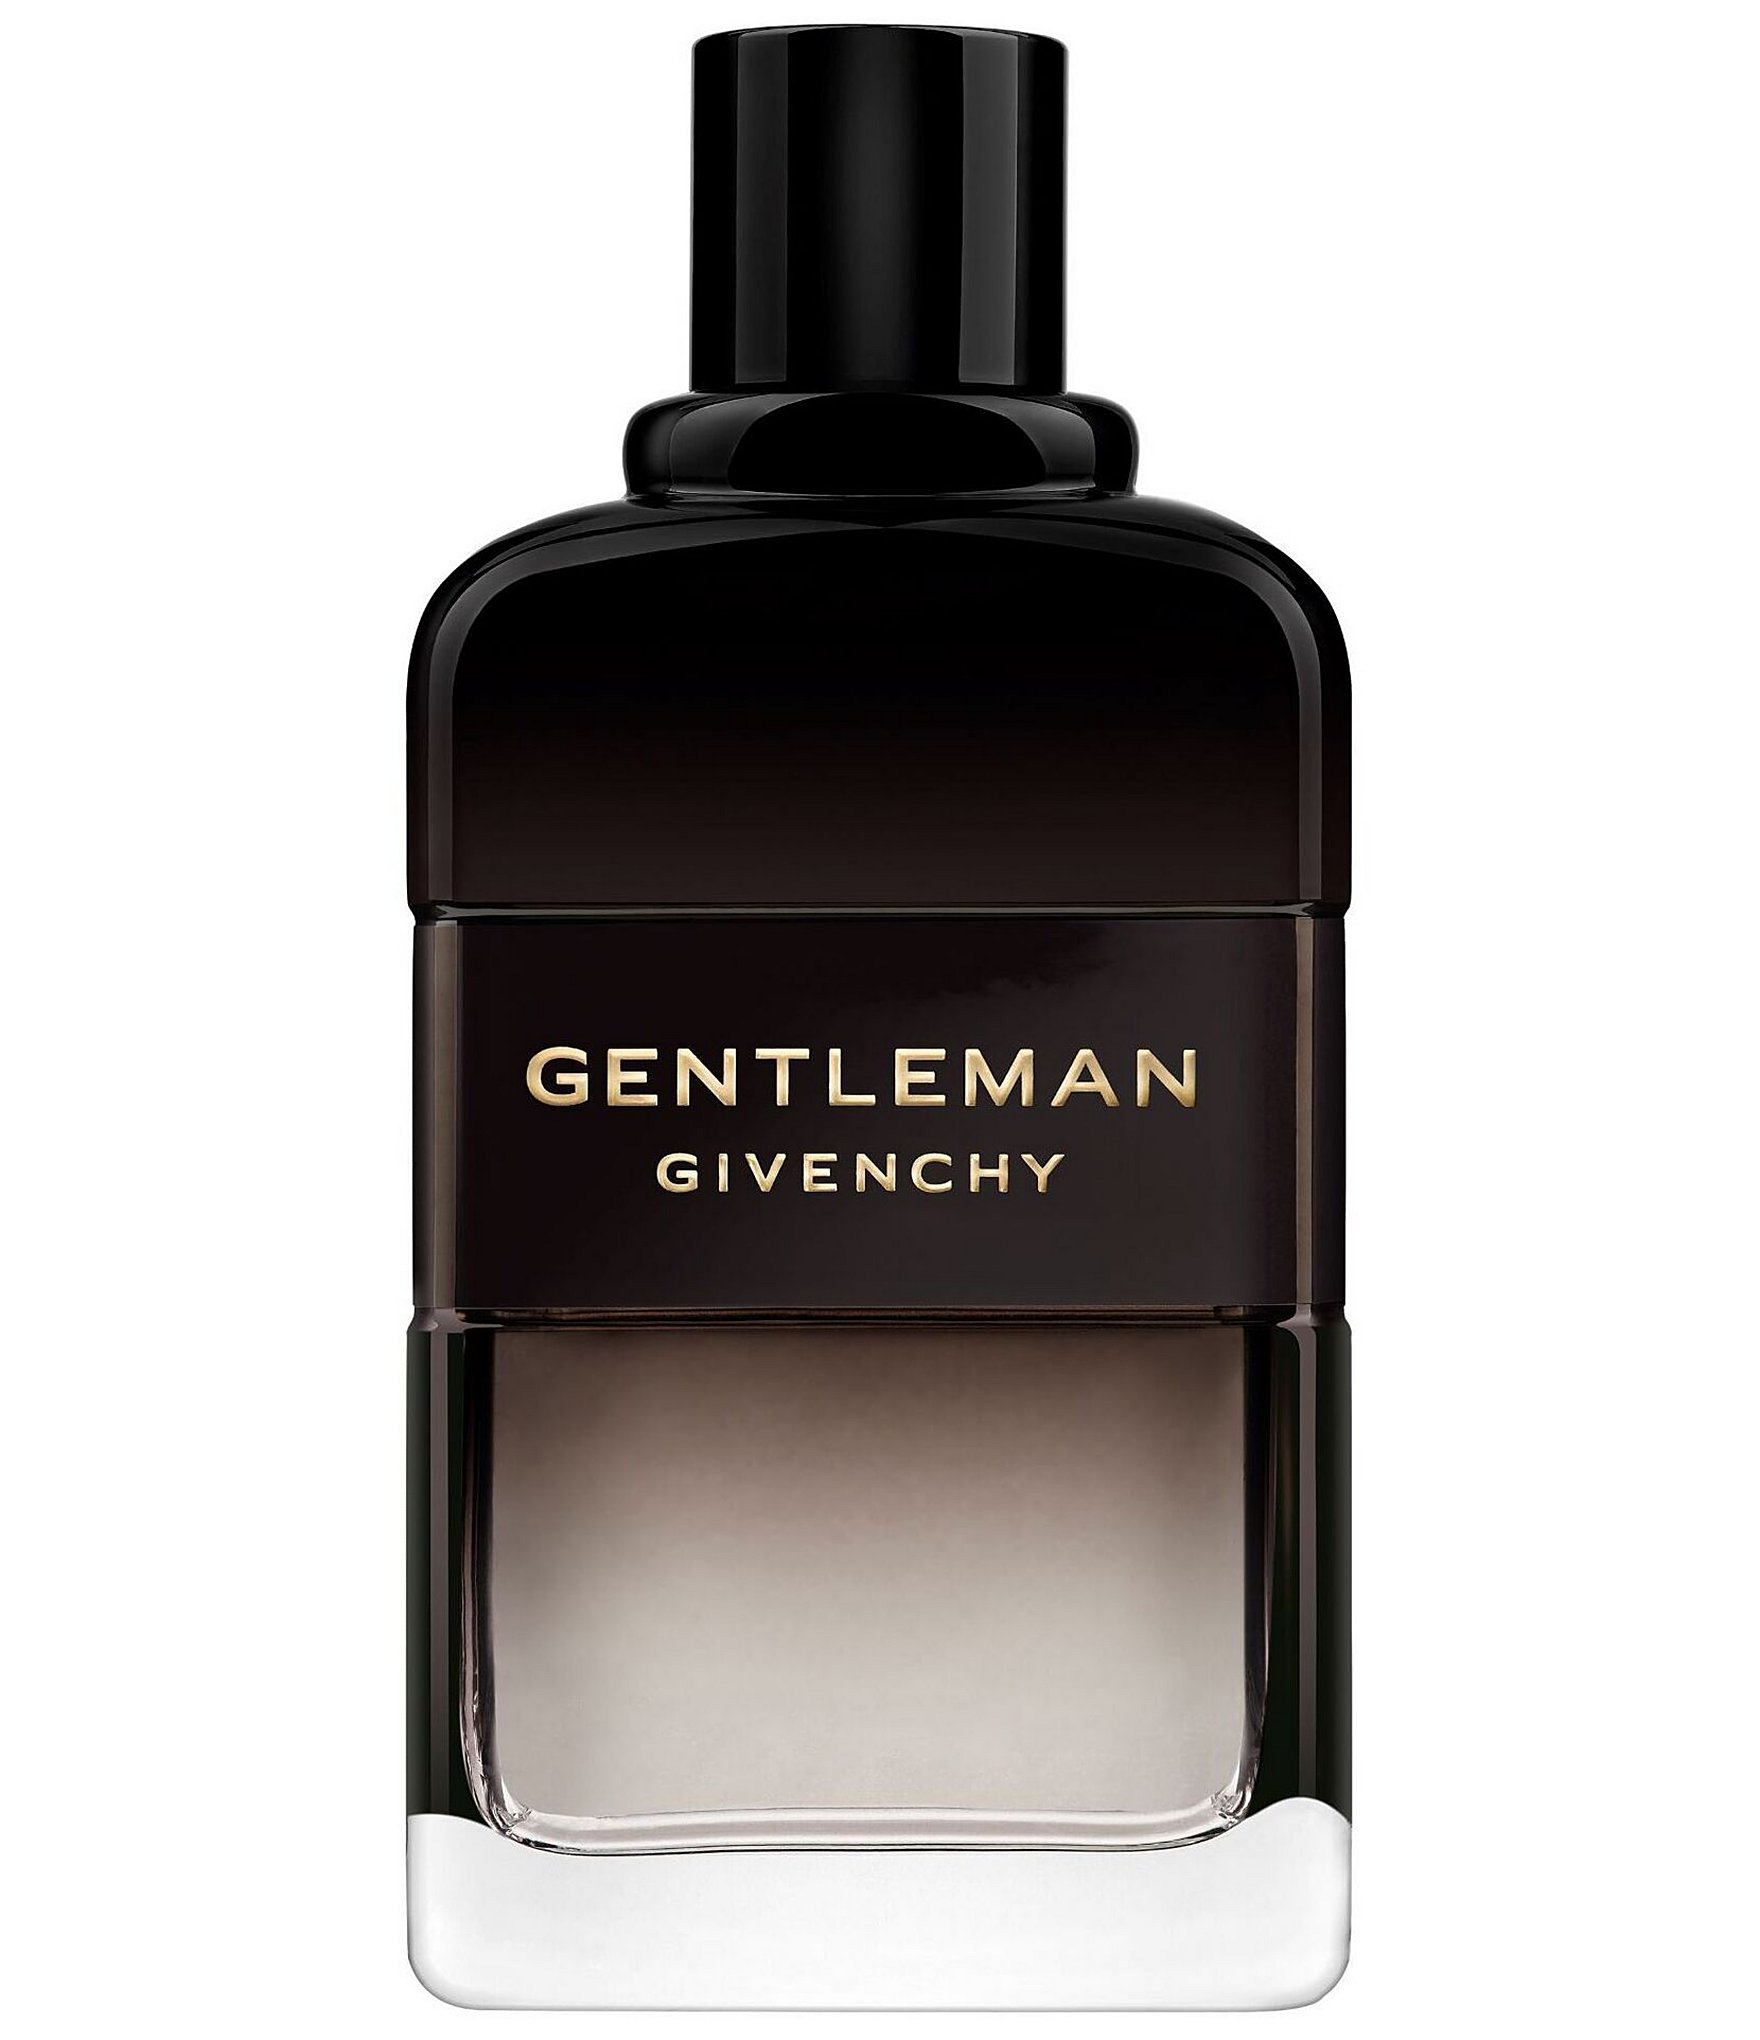 Givenchy Mixed Scent Fragrance, Perfume, & Cologne for Women & Men